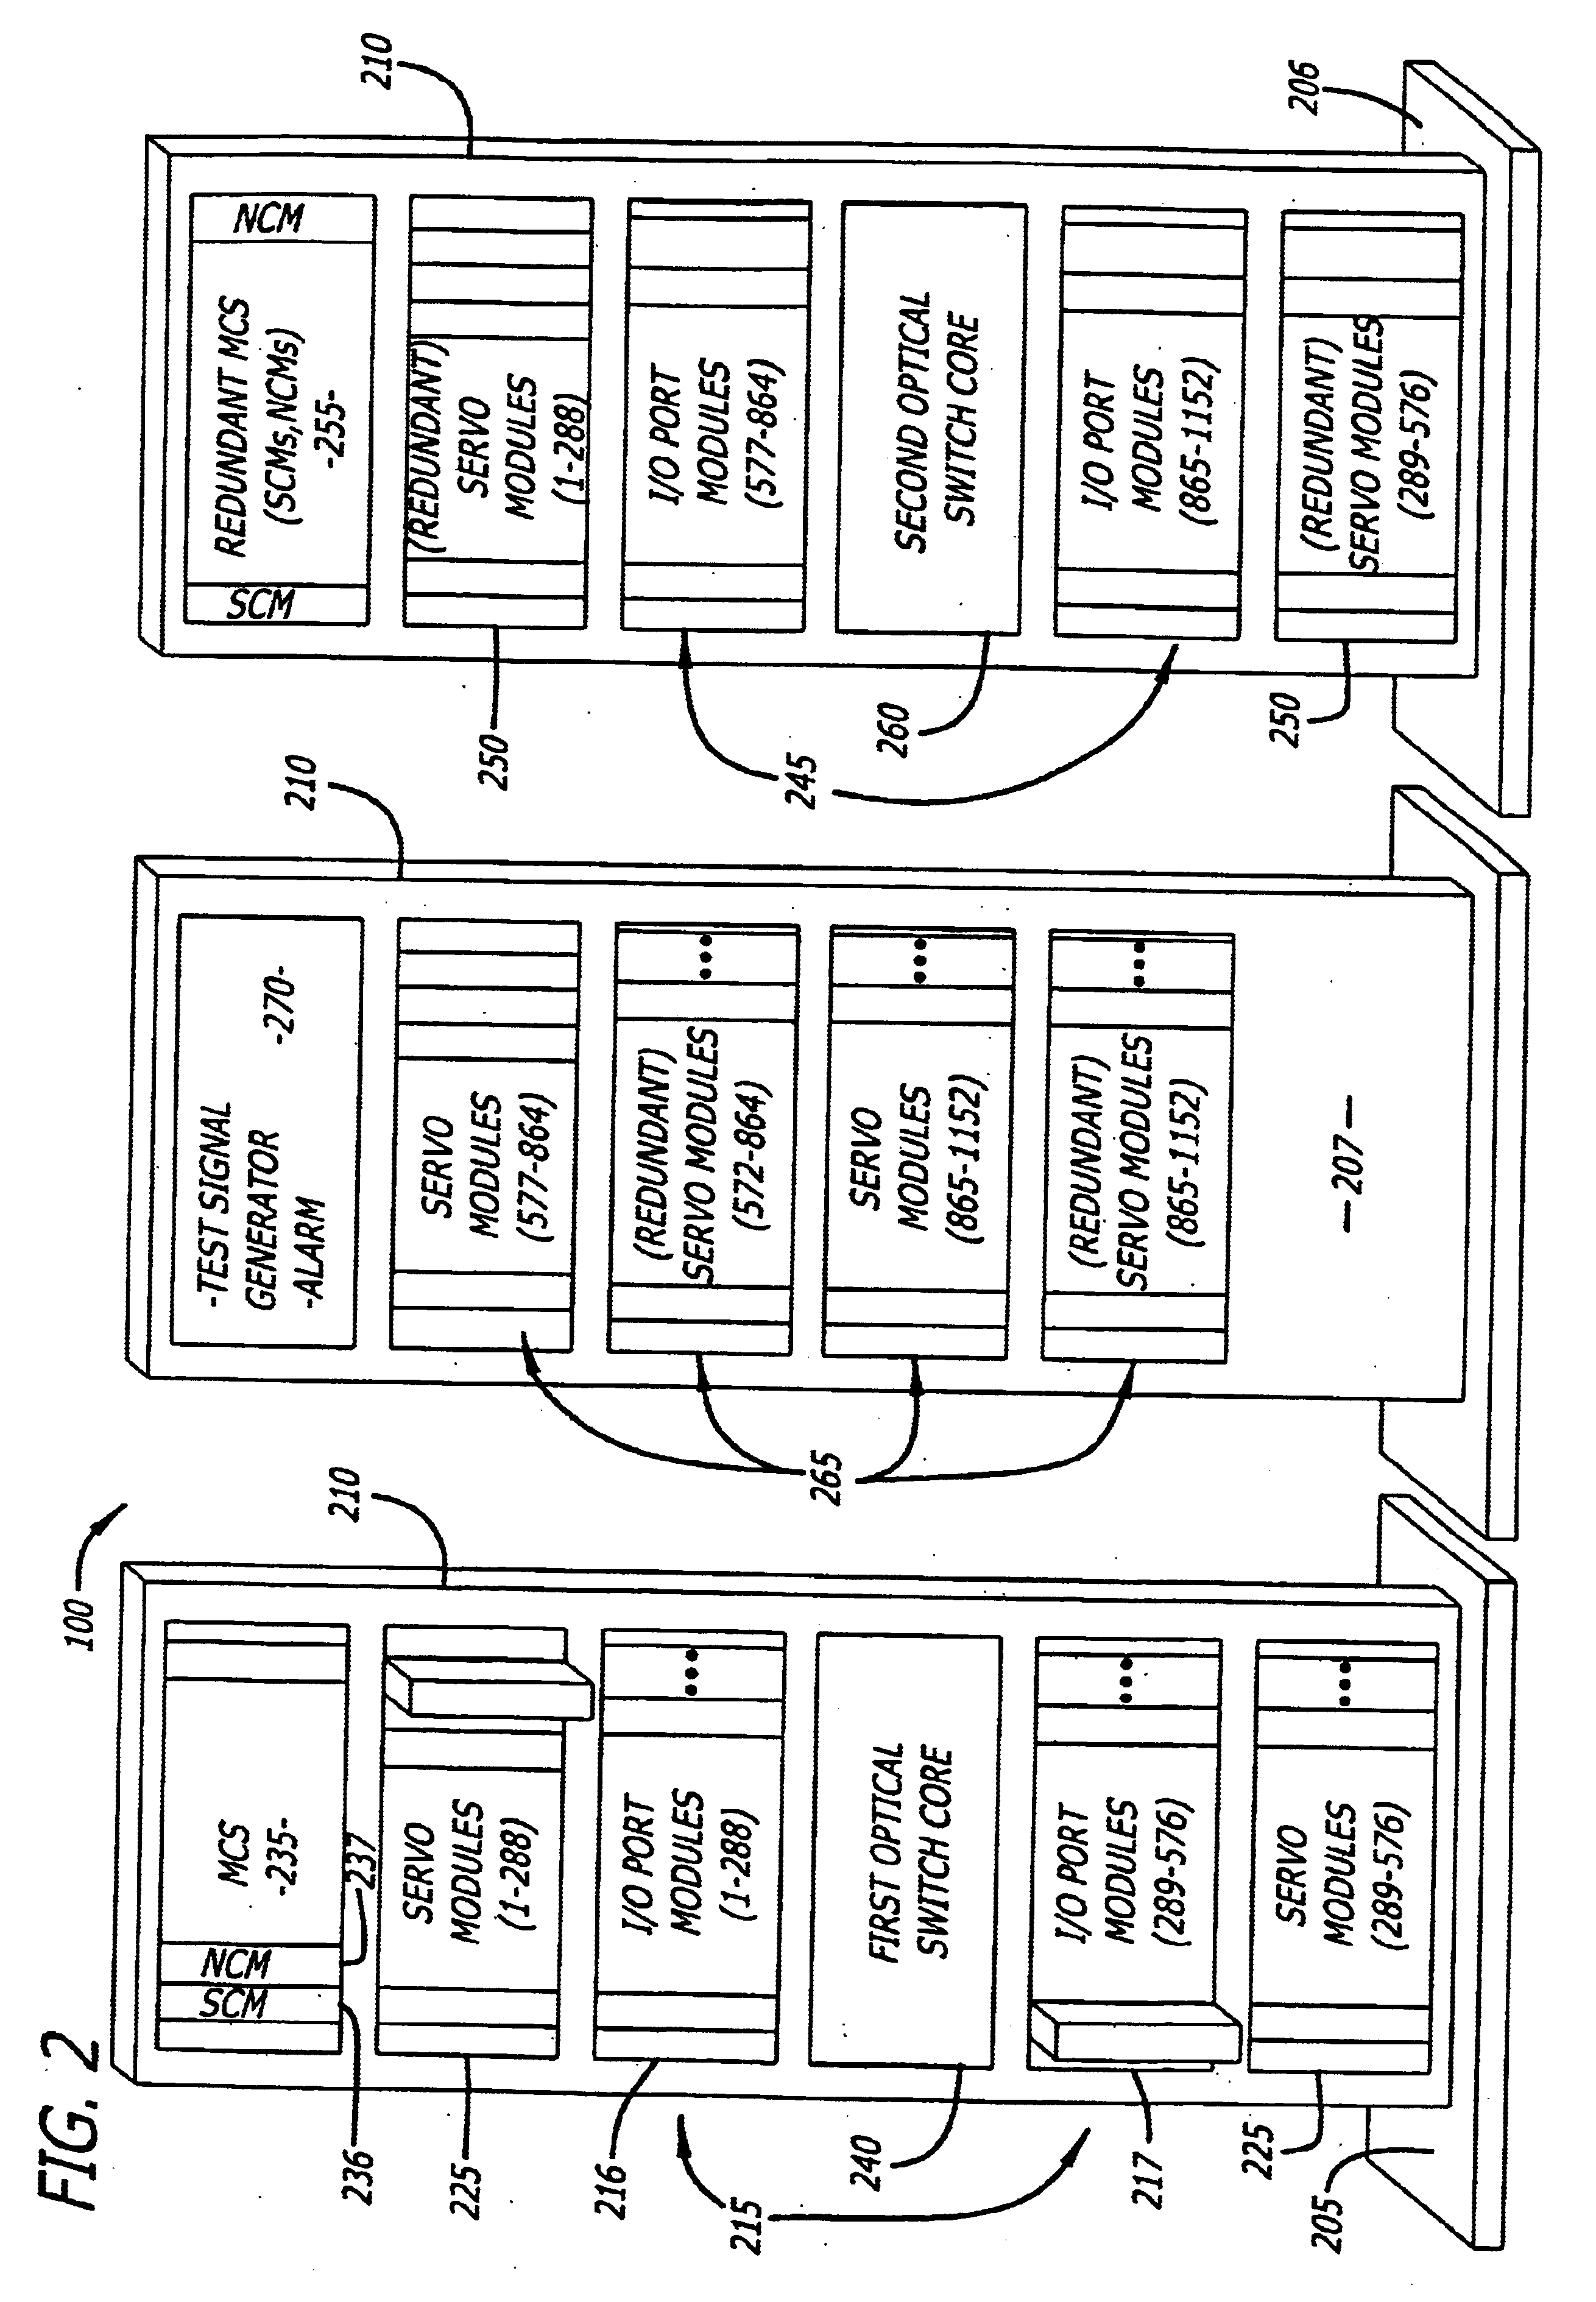 Connection protection between clients and optical cross-connect switches